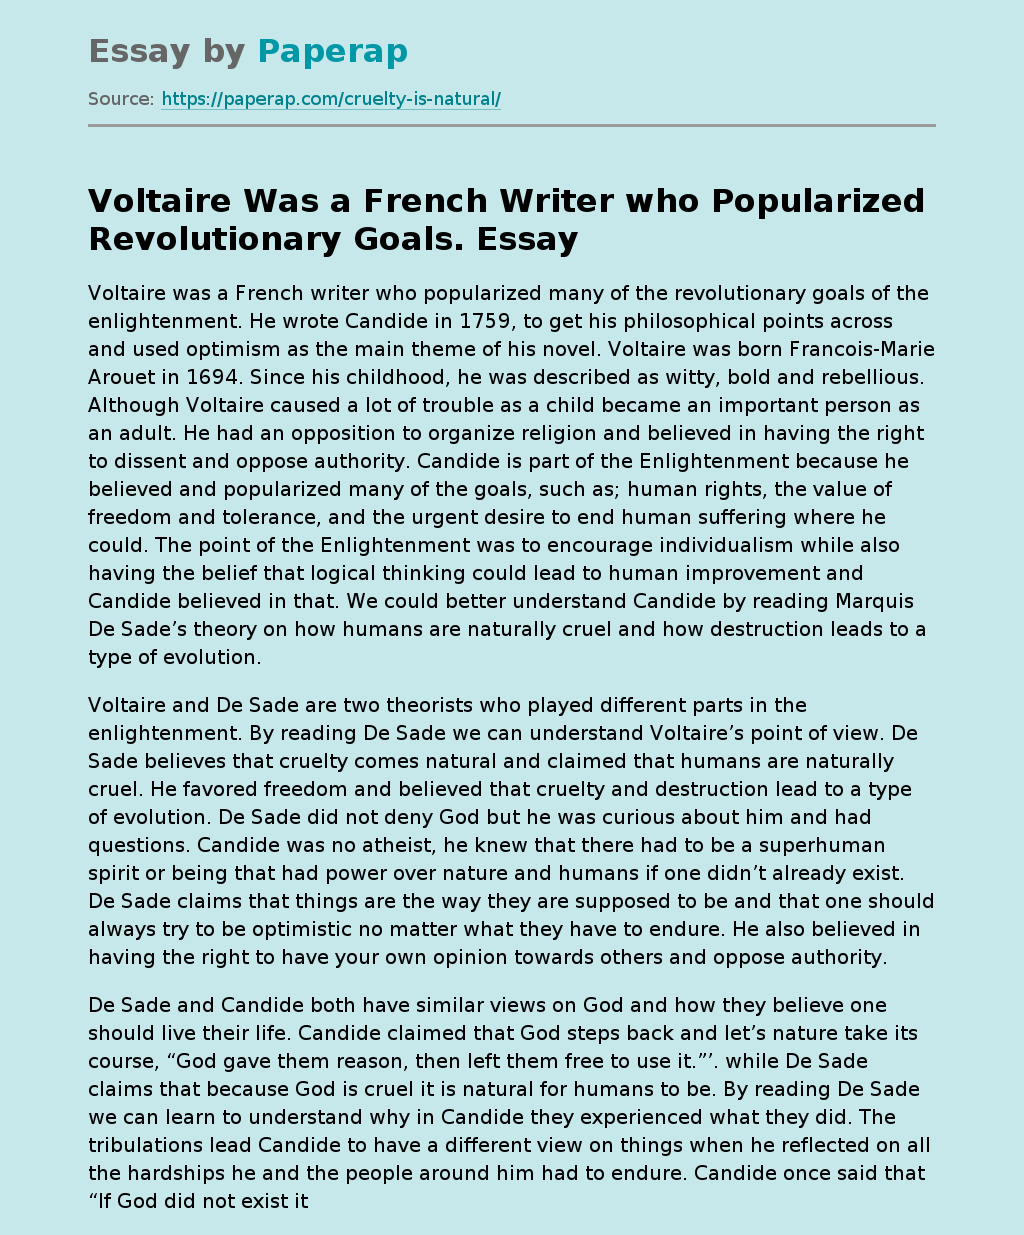 Voltaire Was a French Writer who Popularized Revolutionary Goals.